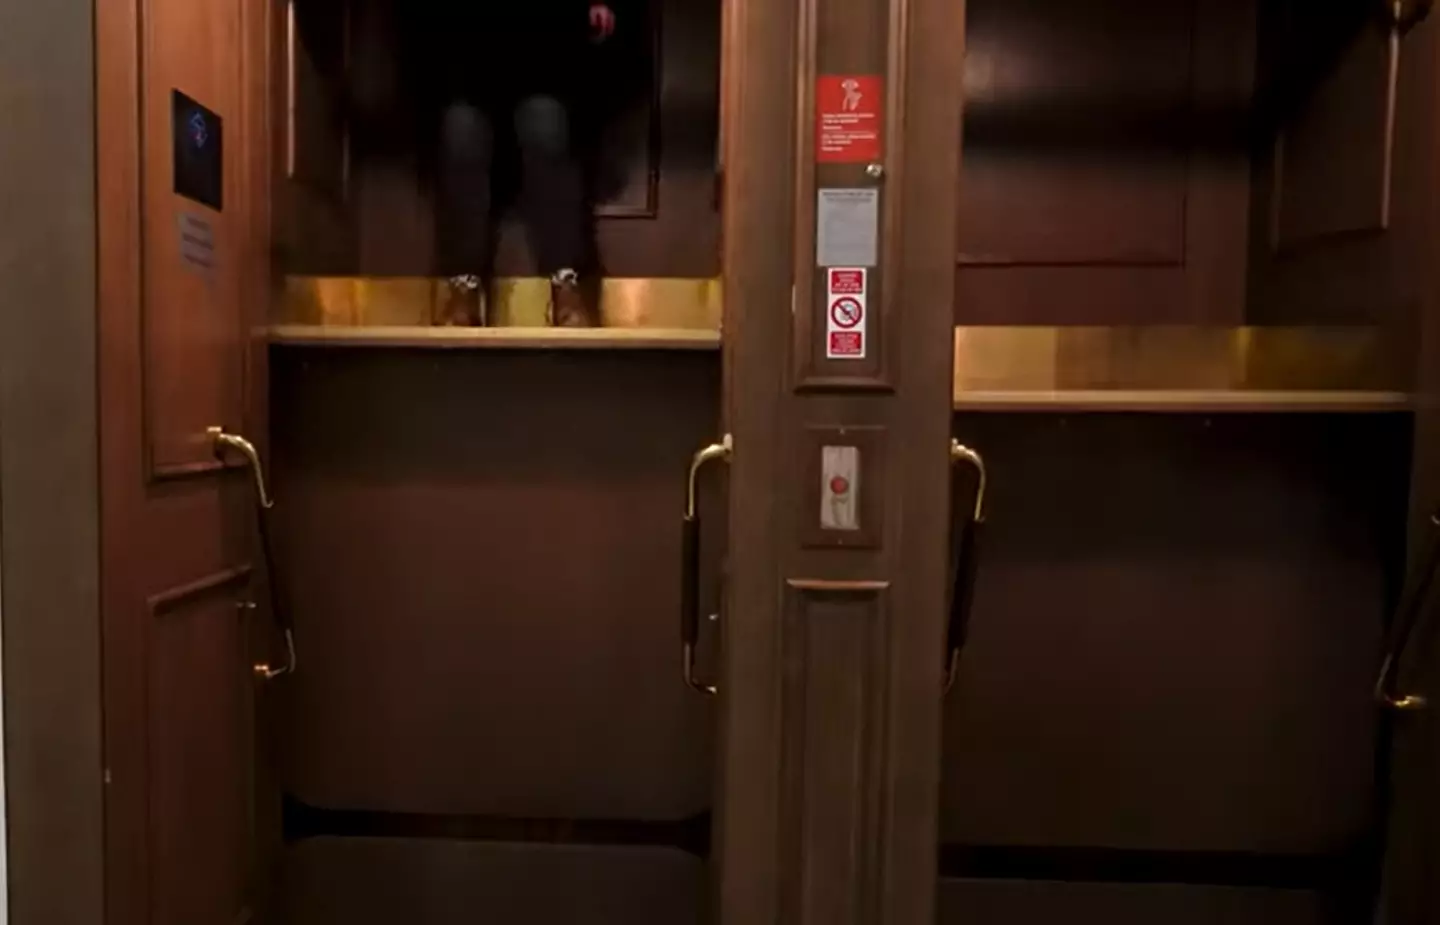 These elevators just keep moving, so you've got to time your moment.